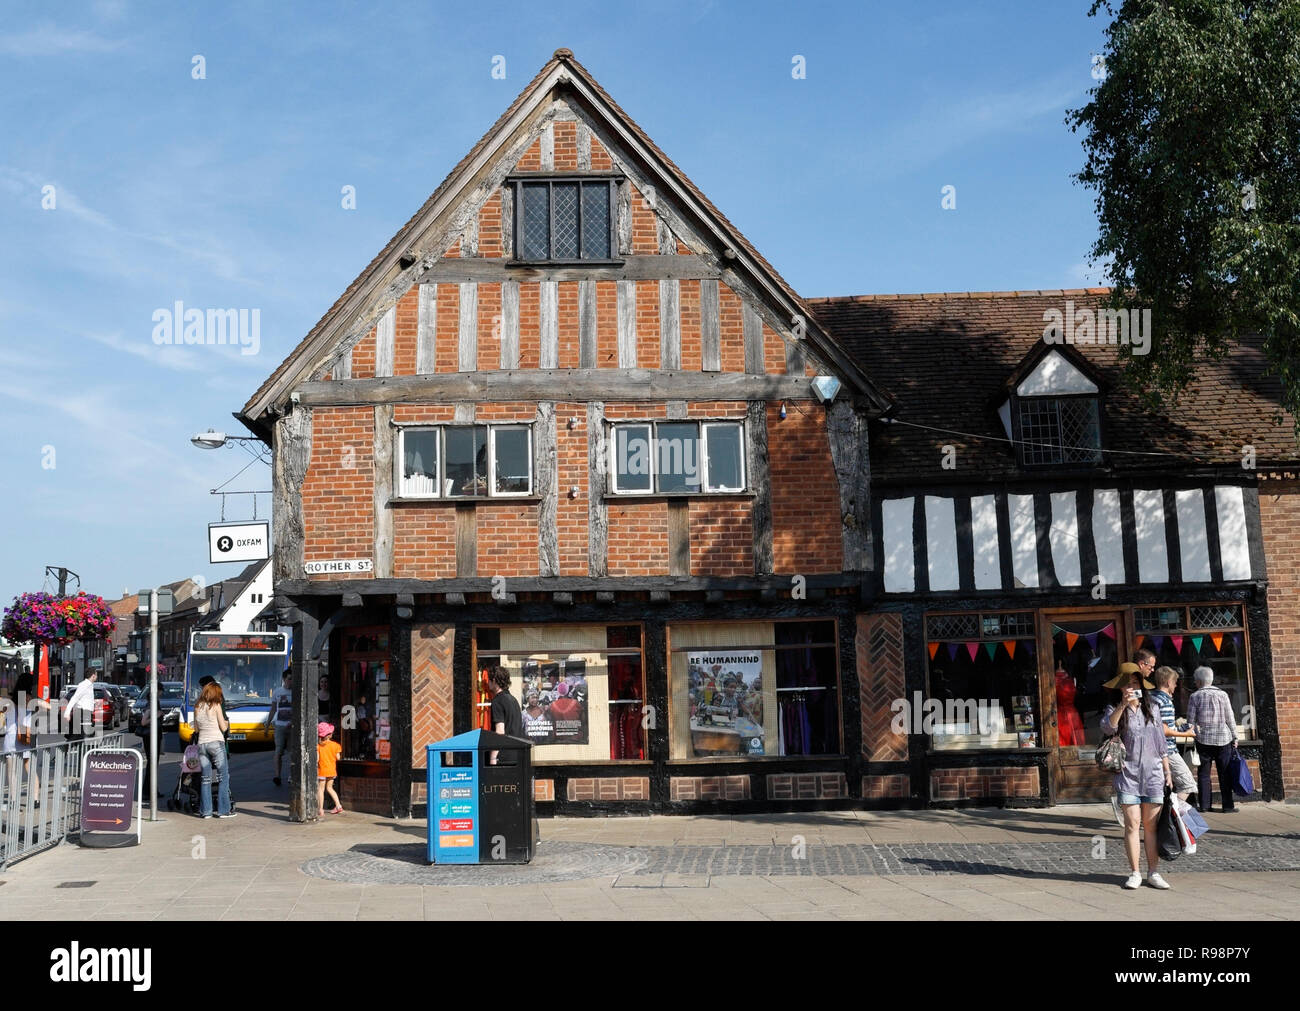 Half Timber Framed building Wood street on the corner of Rother Market in Stratford Upon Avon England, listed building English town Stock Photo